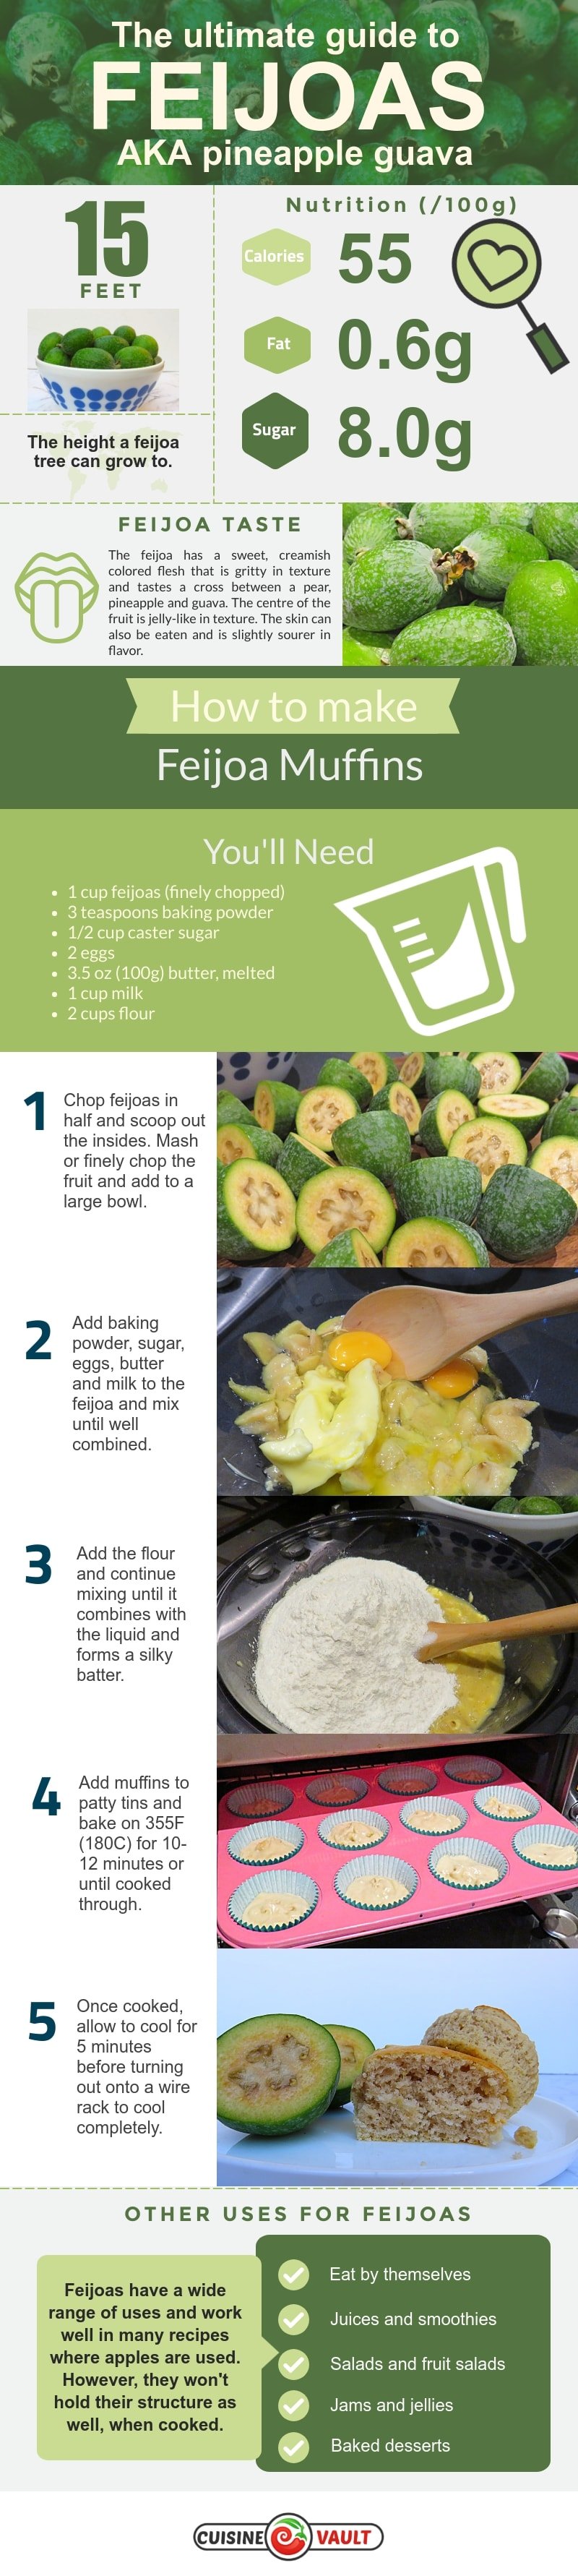 An infographic that provides a guide to feijoas